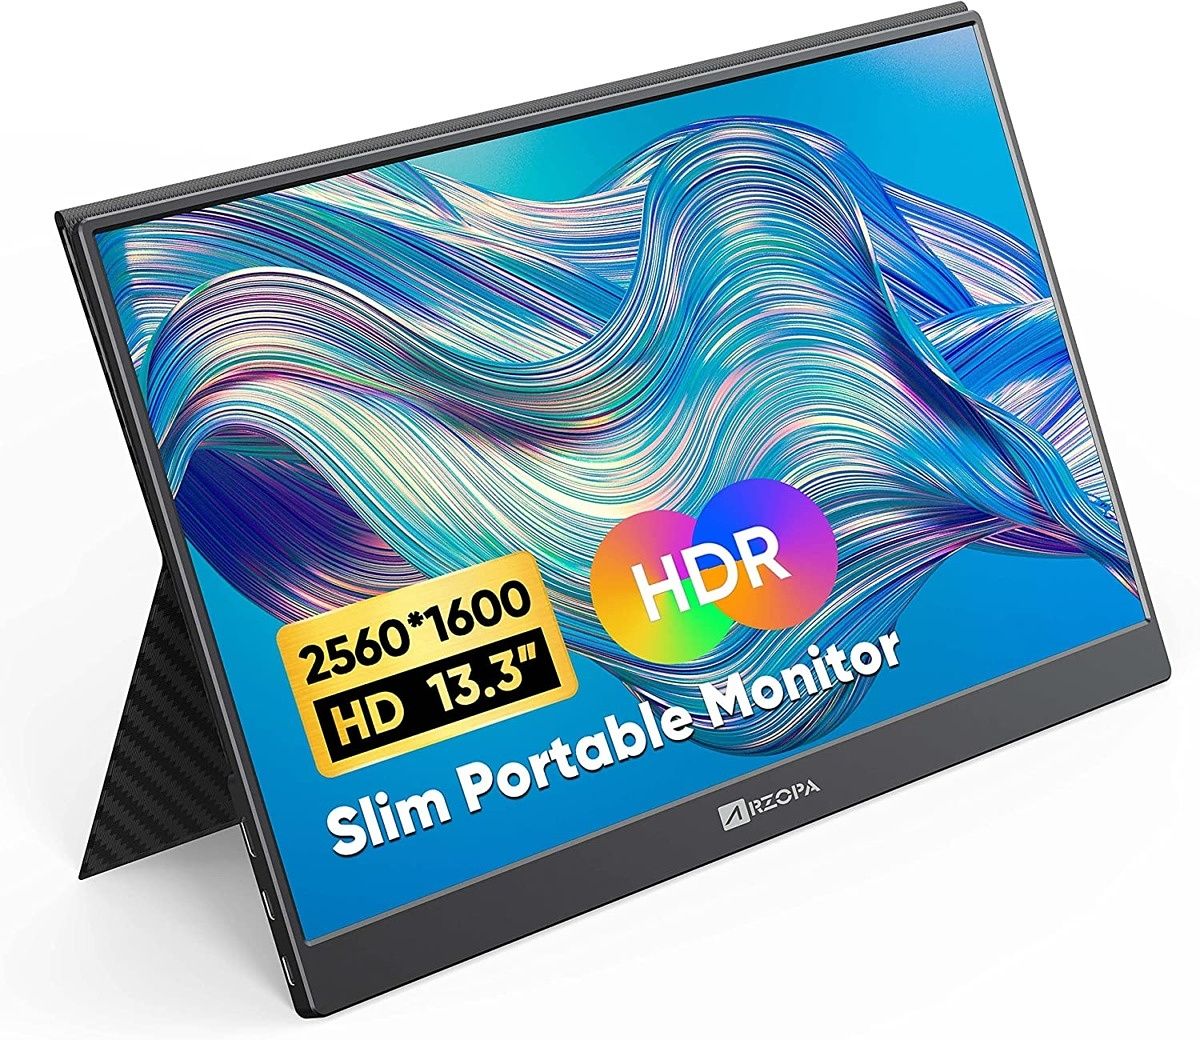 If you need to live the dual-screen life everywhere you go, the Arzopa portable monitor is the perfect choice. It connects easily via a single USB-C cable, and it's a 13.3-inch panel with the same 16:10 aspect ratio as the XPS 13, making it the perfect pairing. Plus, it comes in a very sharp 2560 x 1600 resolution, so it looks great.